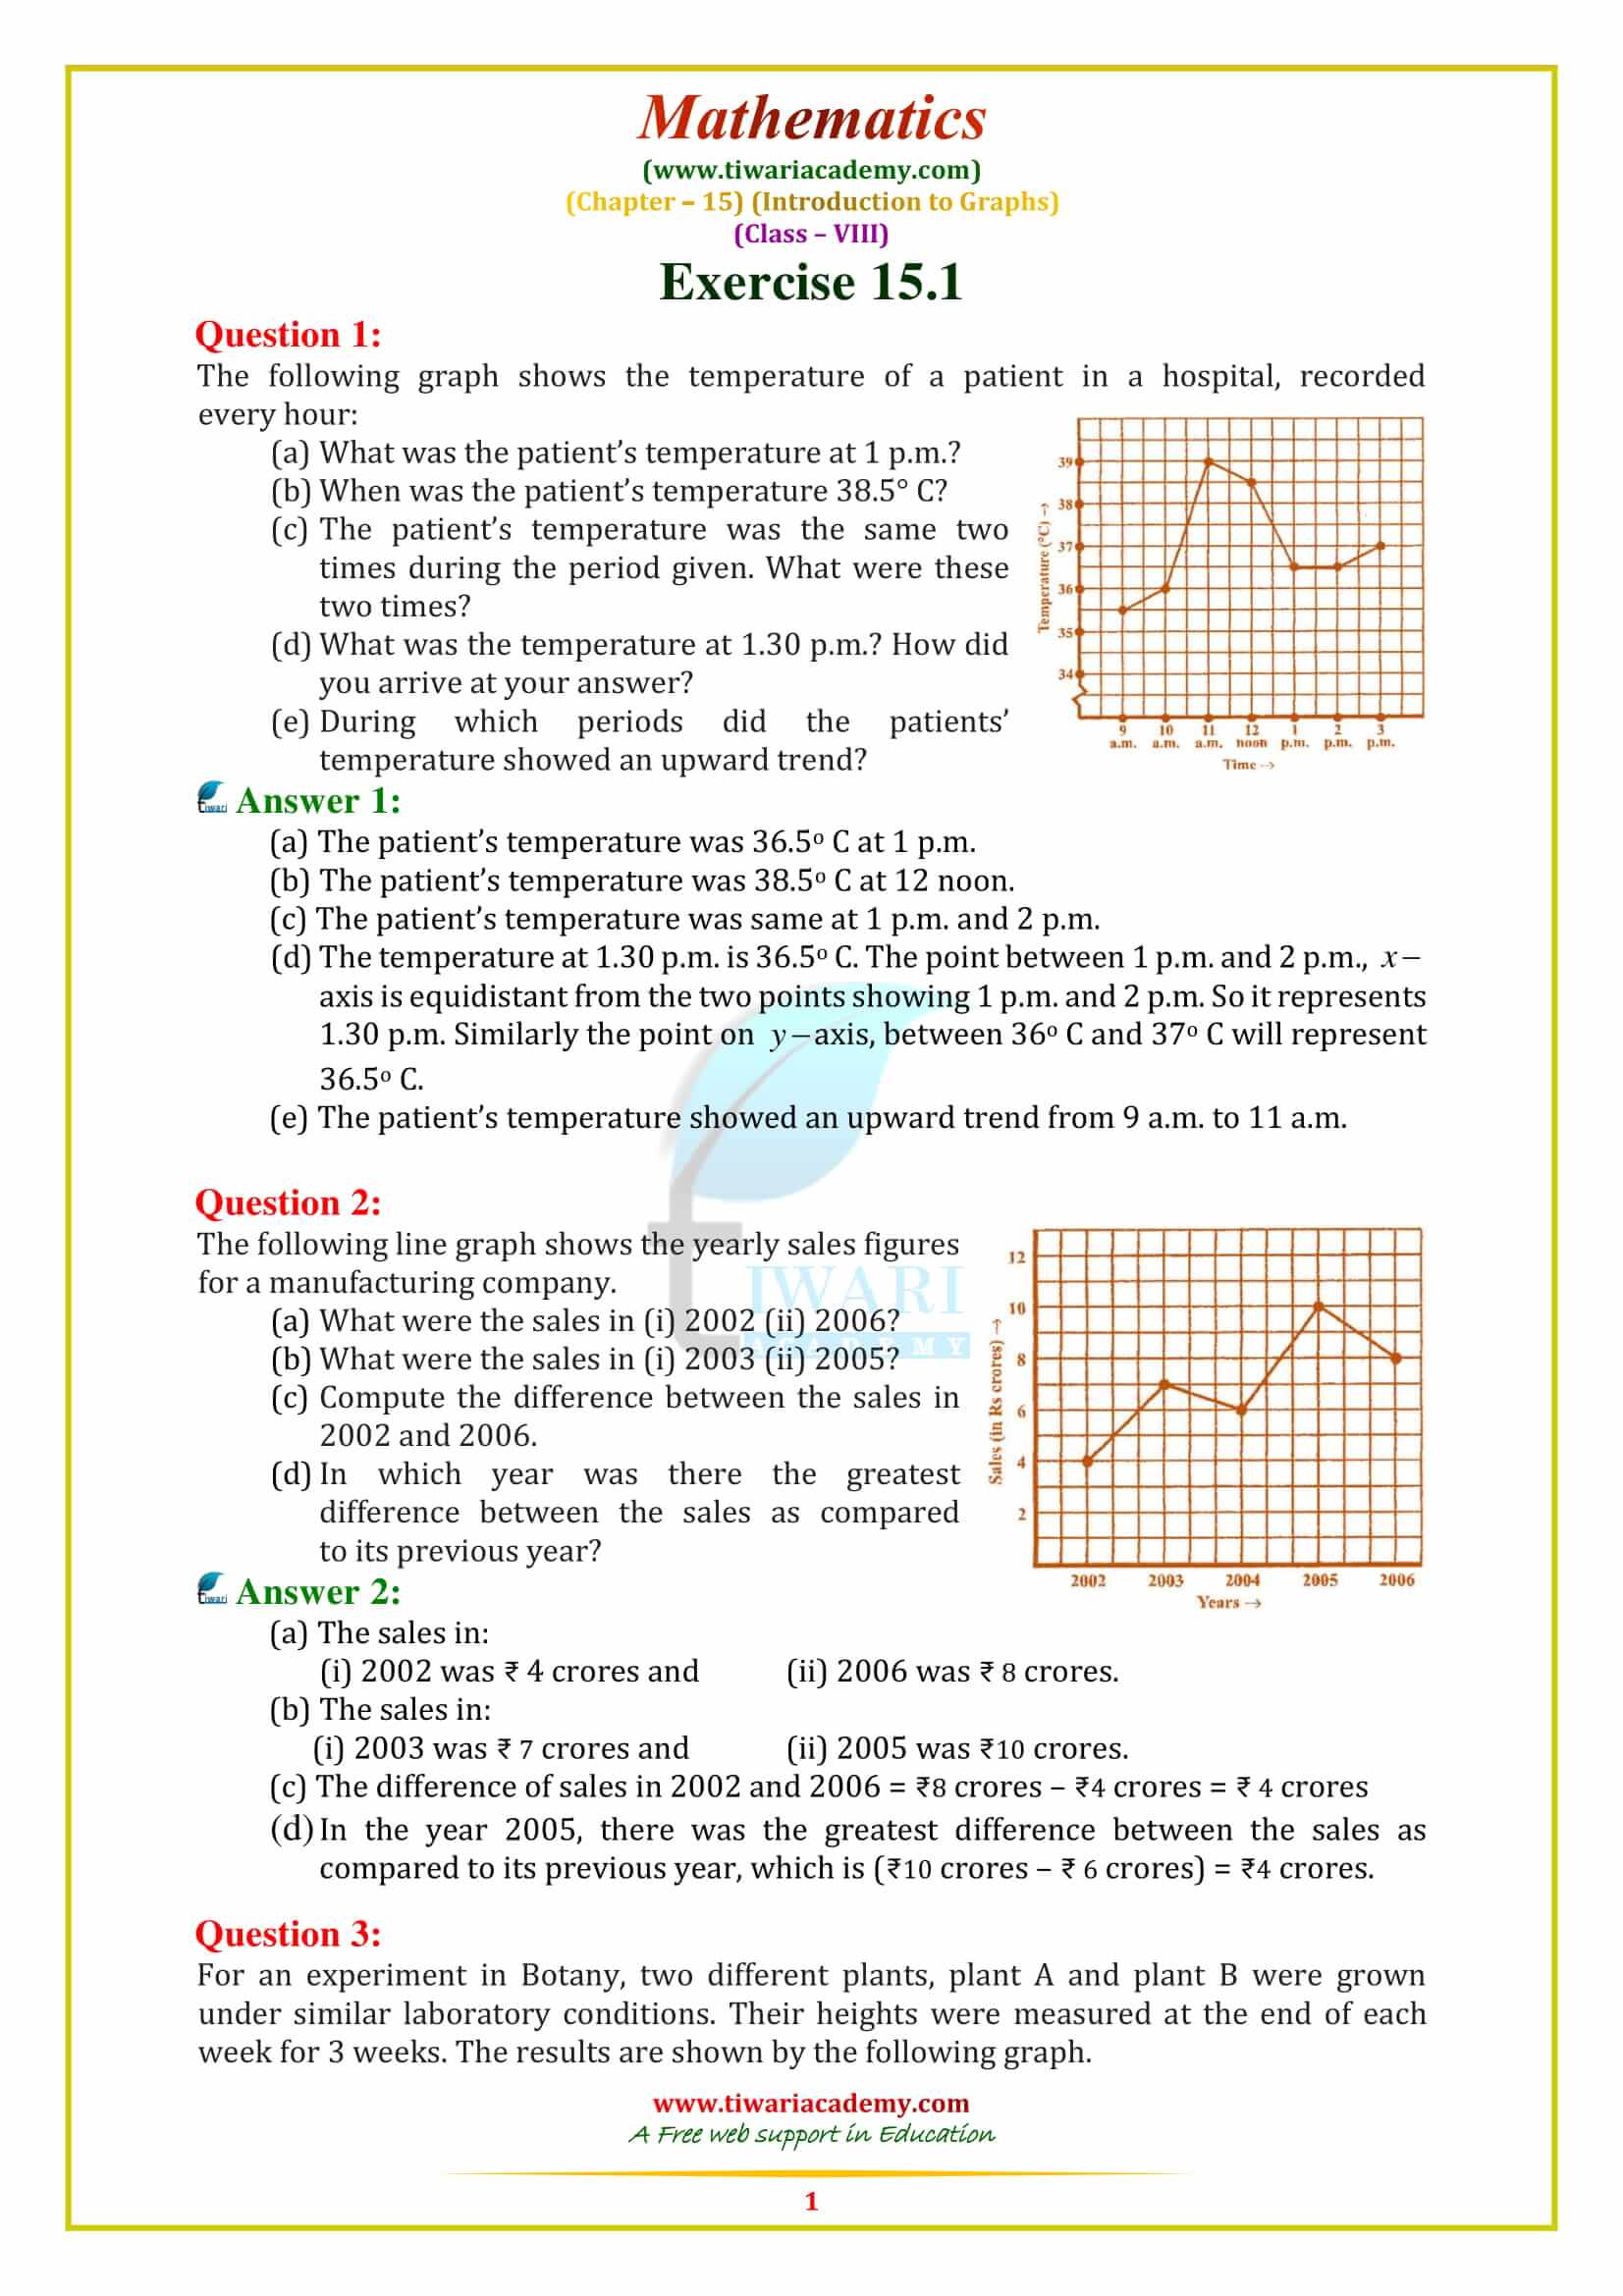 NCERT Solutions for Class 8 Maths Chapter 15 INTRODUCTIONS TO GRAPHS